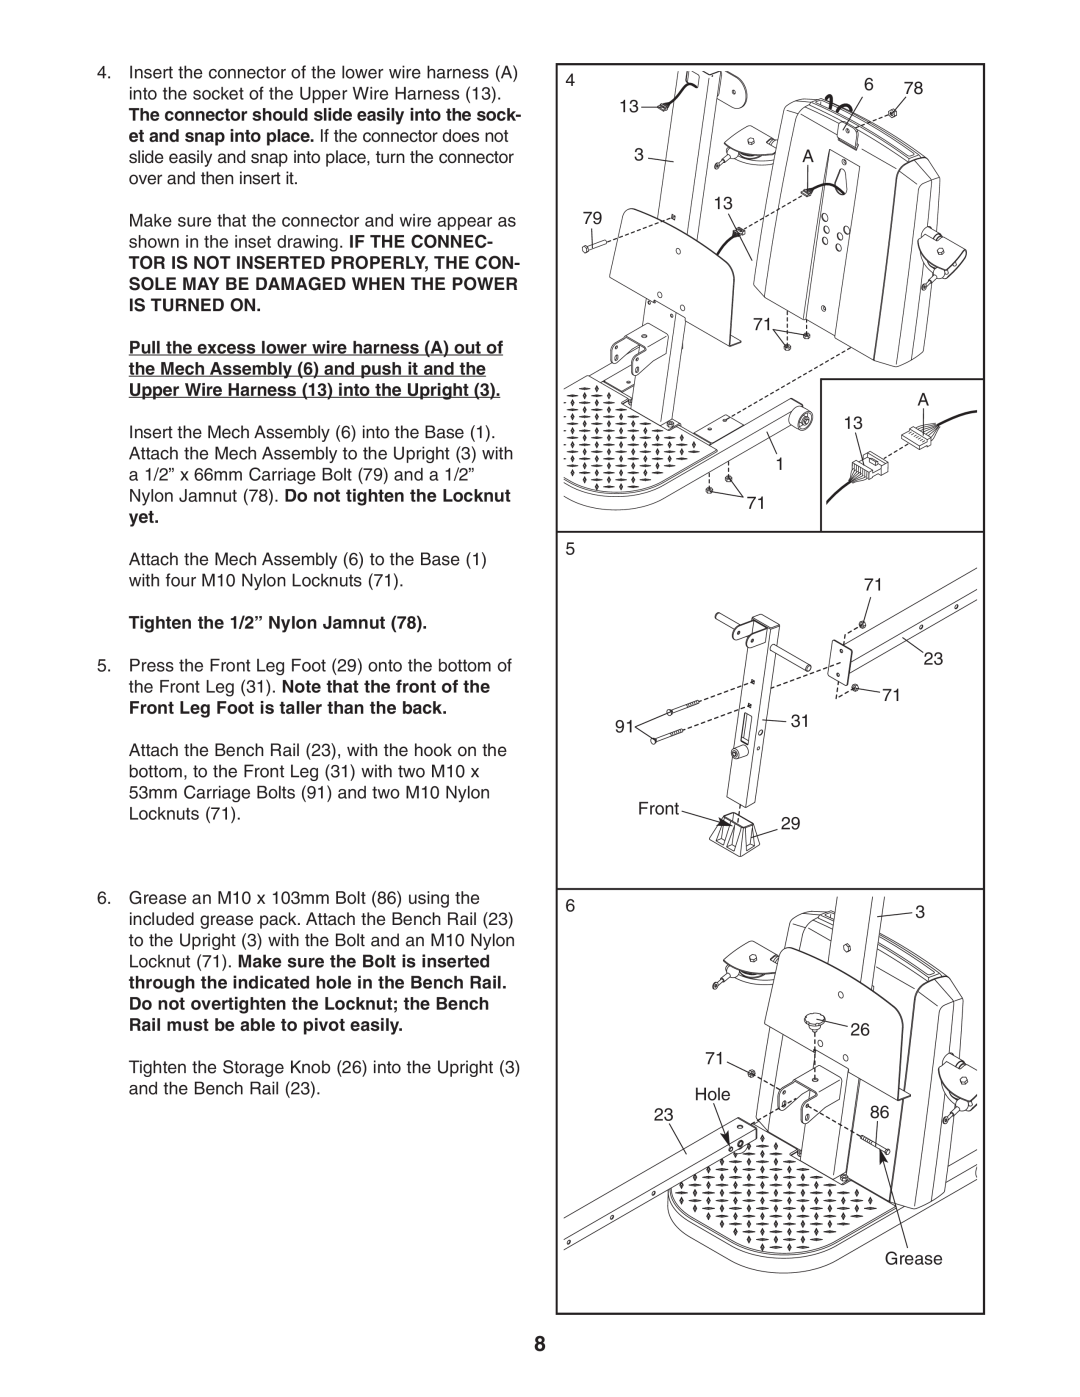 Weider WESY68632 user manual The connector should slide easily into the sock 